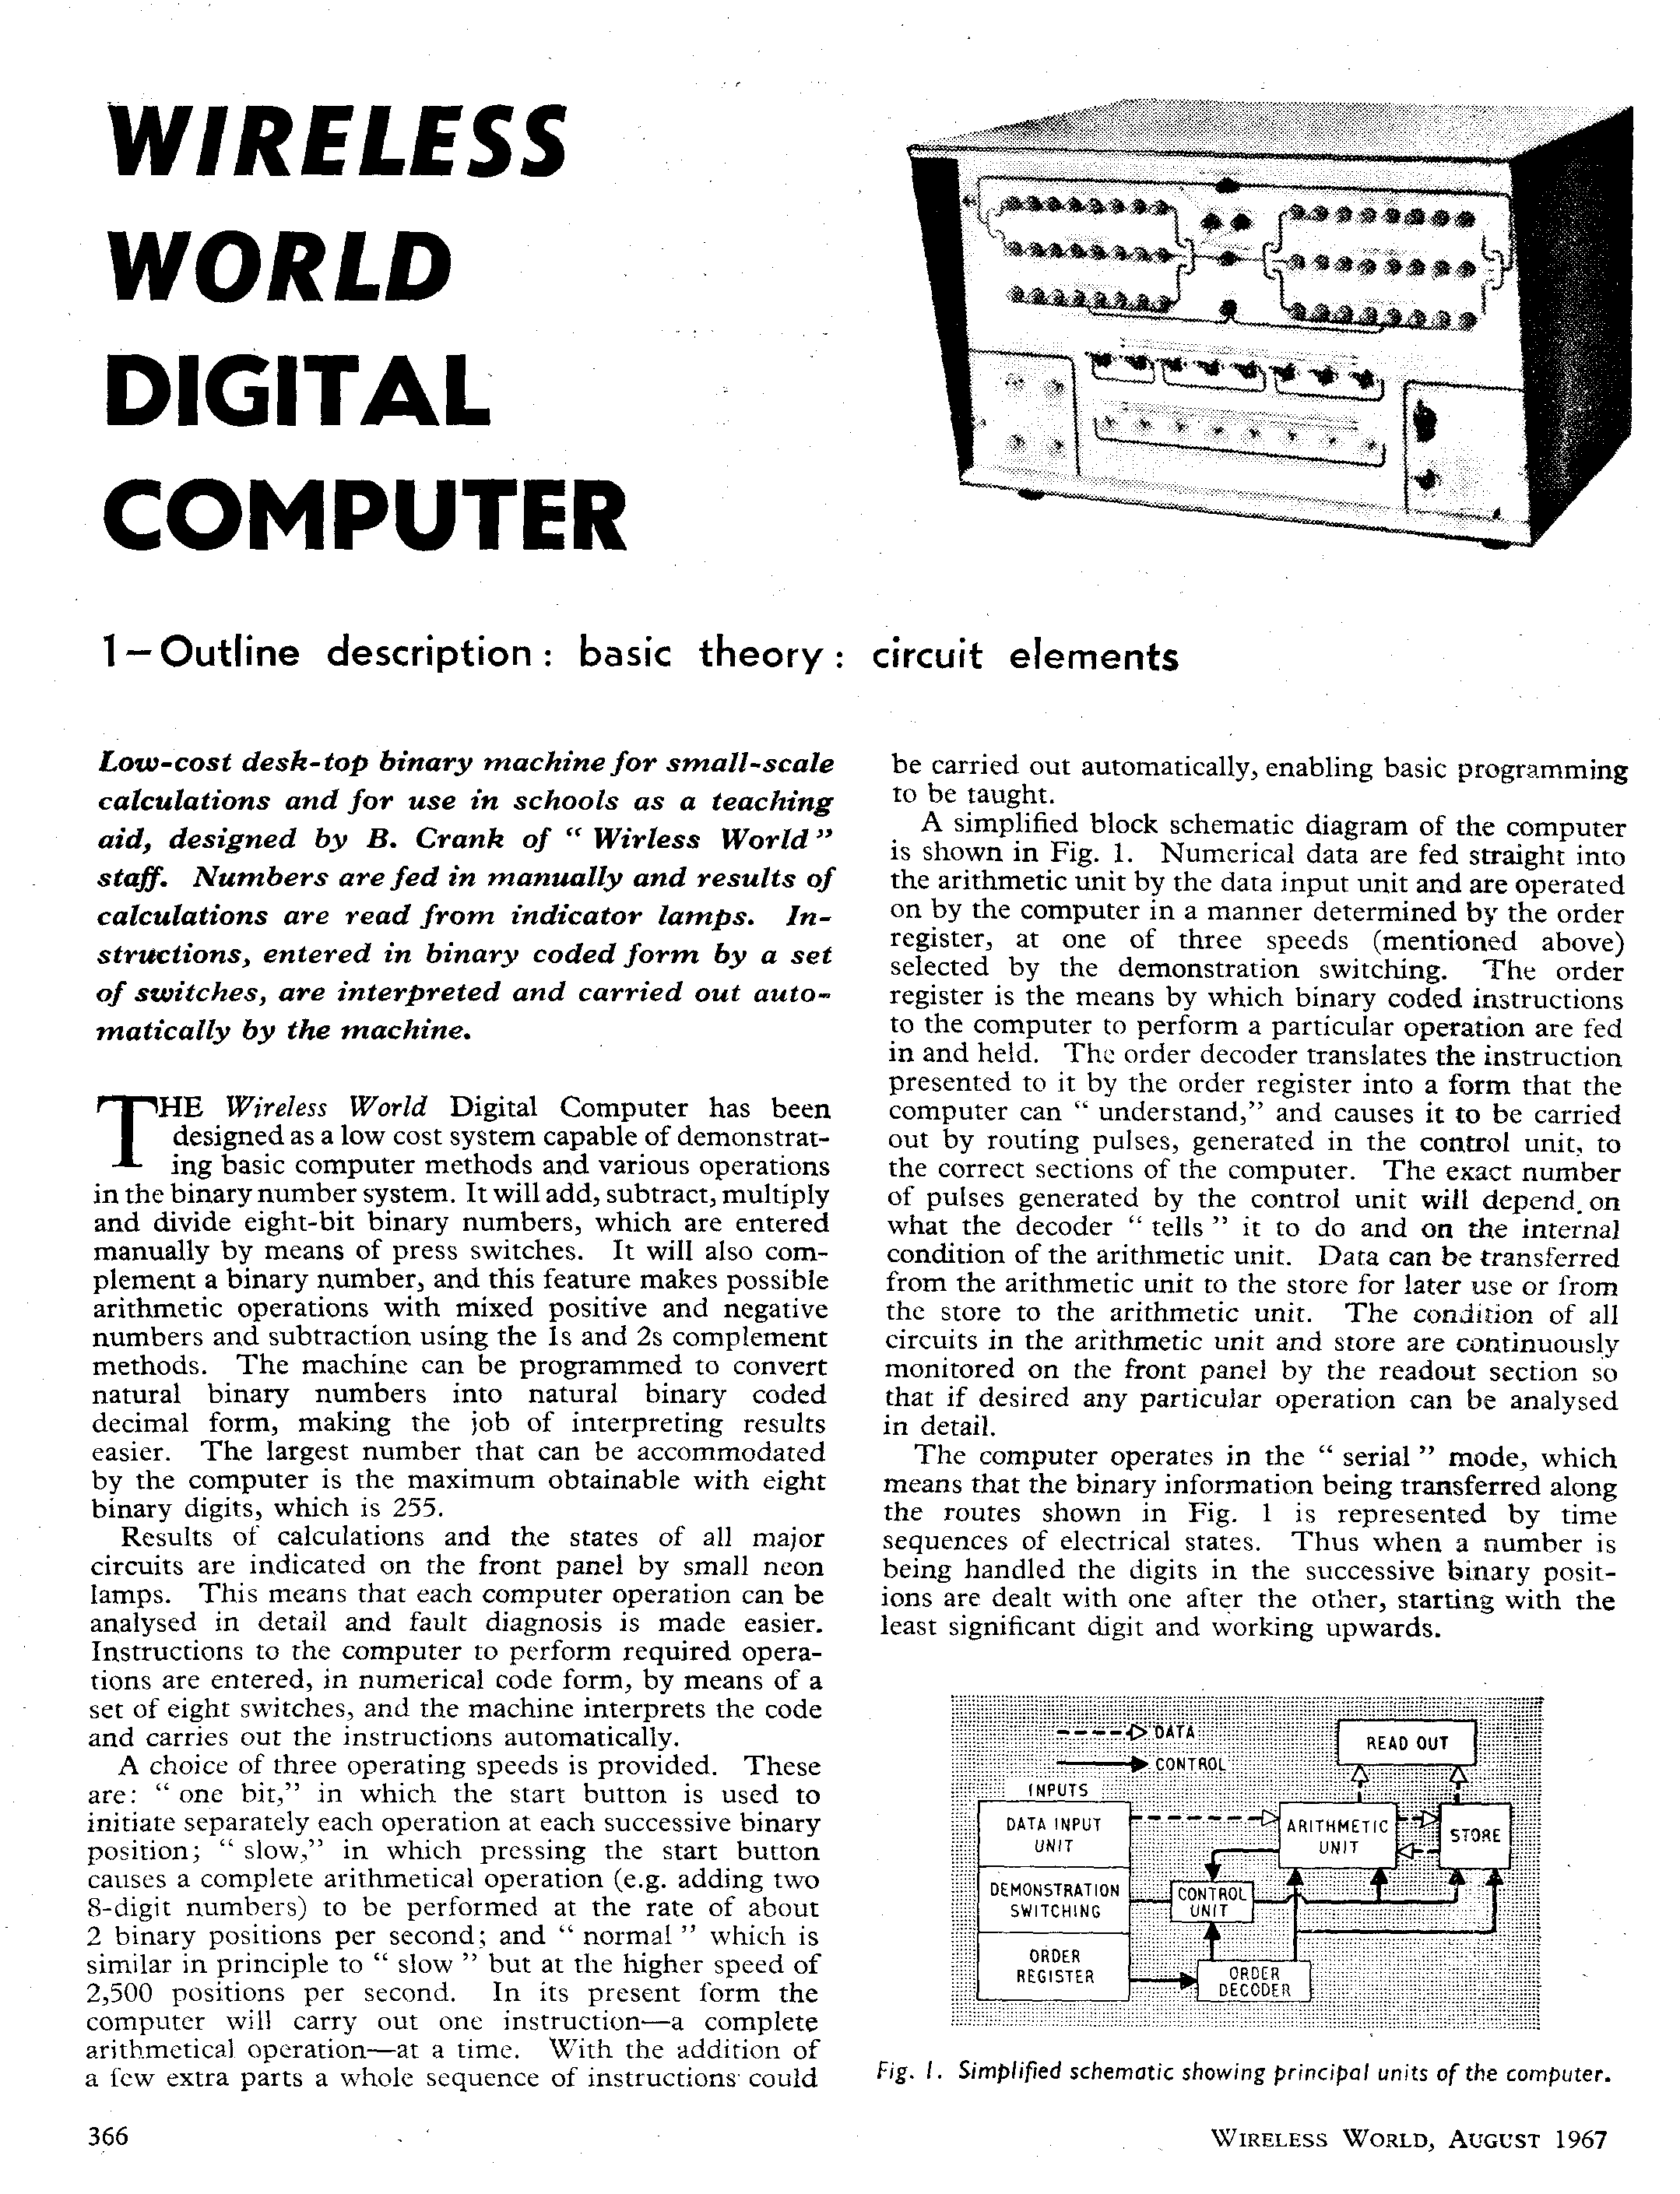 First page - description of the computer